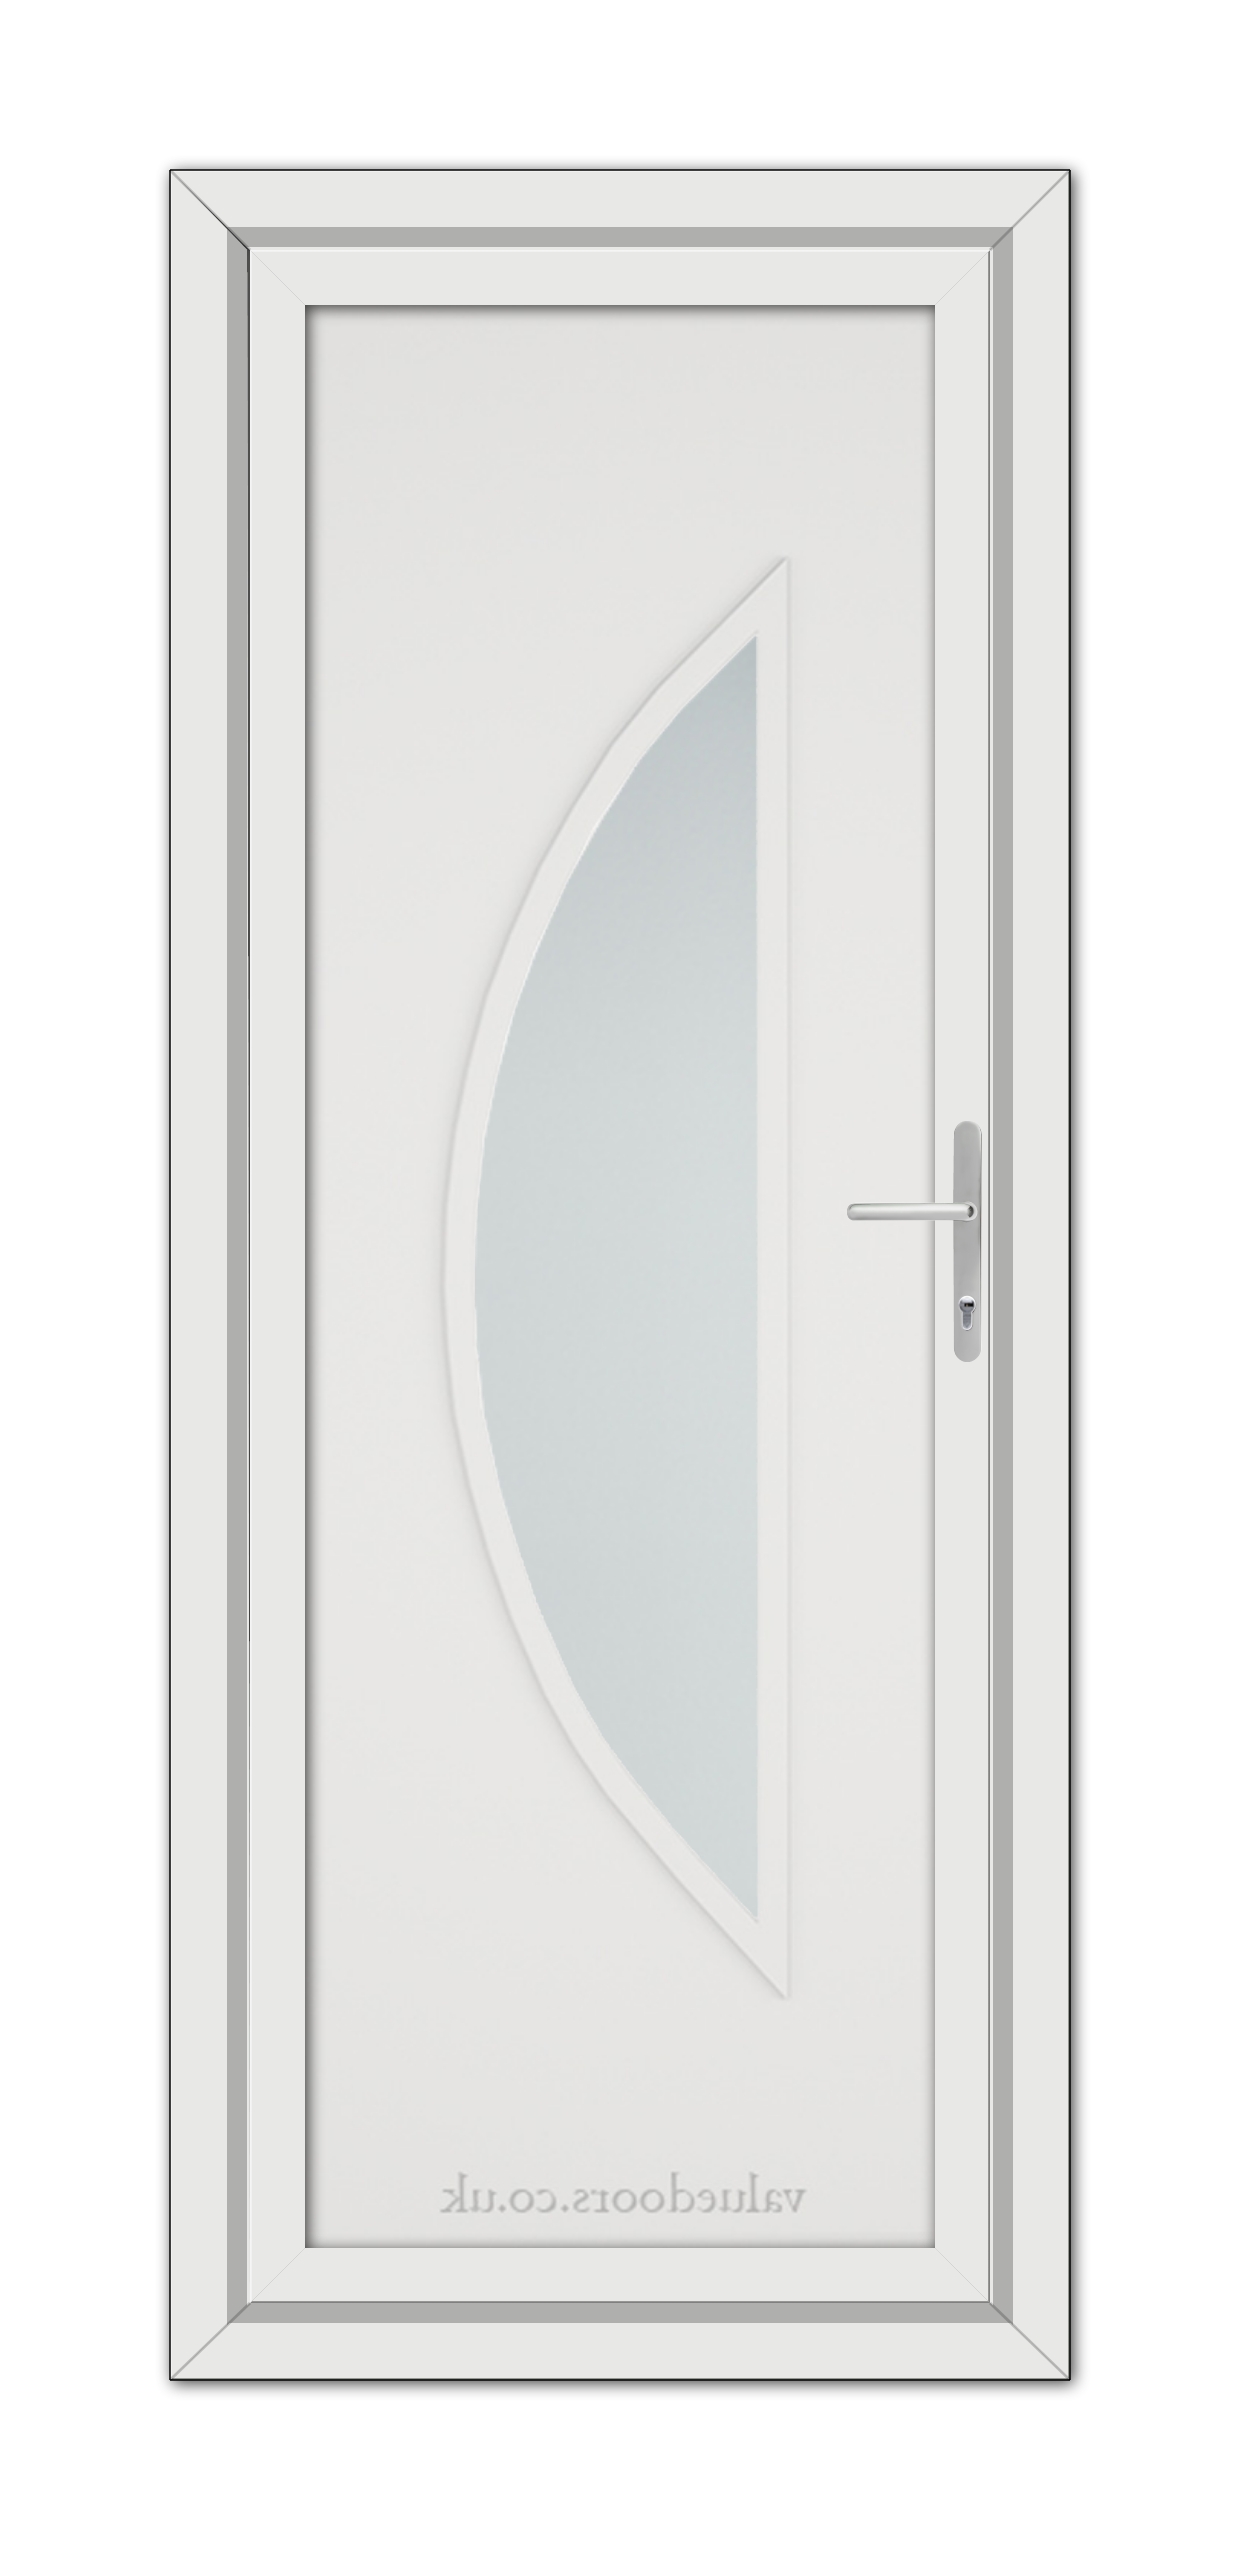 A White Modern 5051 uPVC Door featuring an asymmetrical frosted glass window and a silver handle, set within a simple frame.